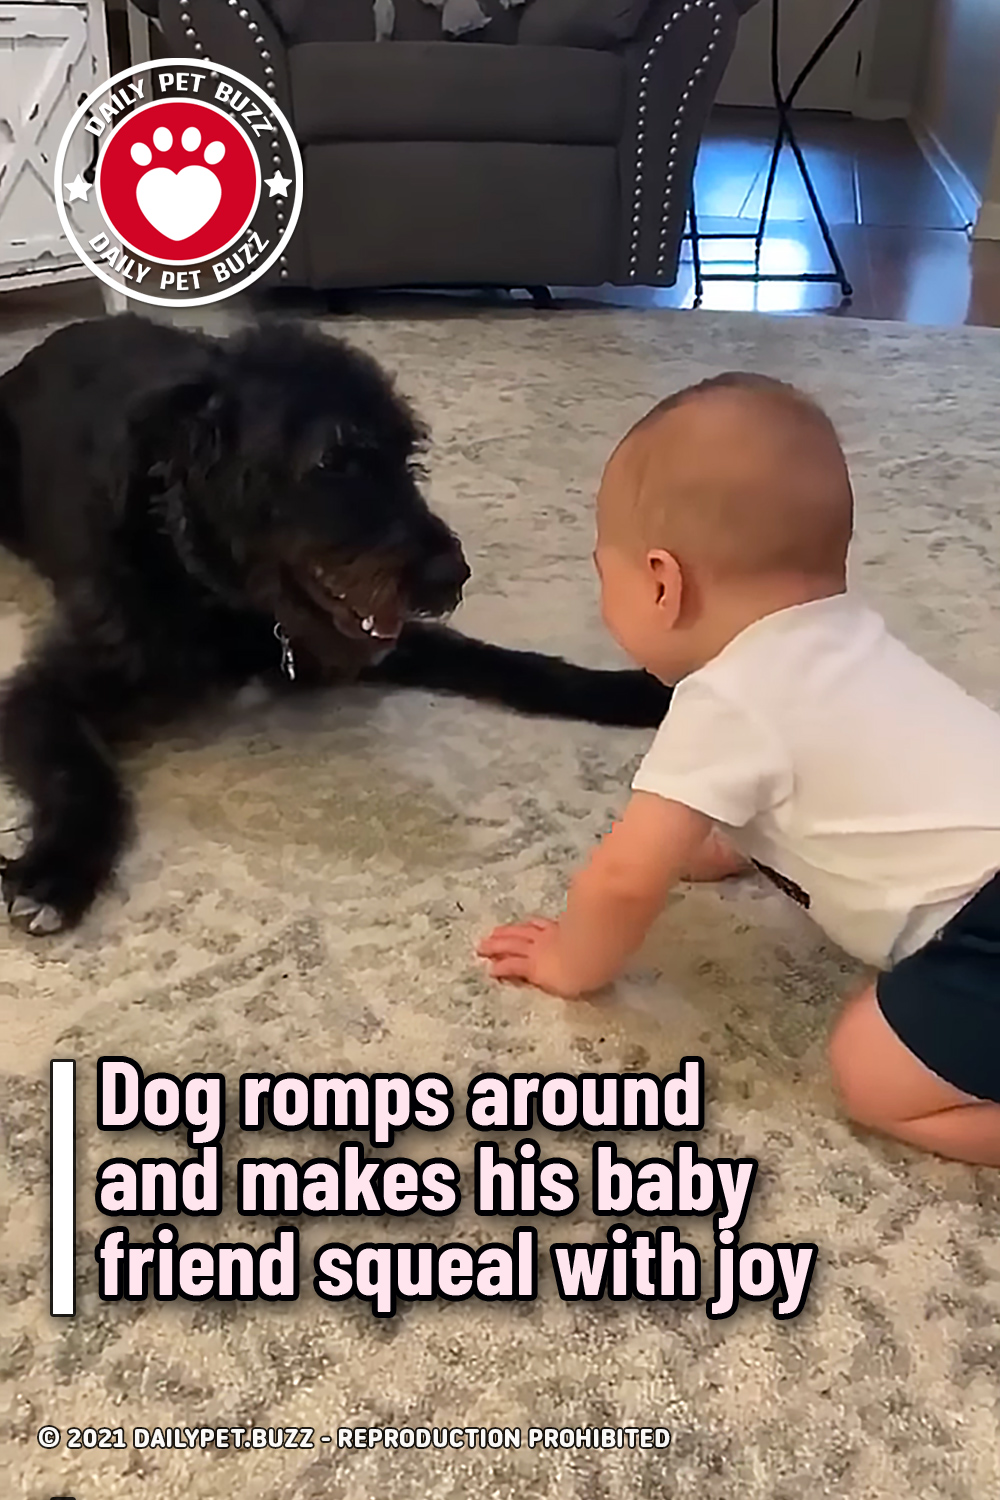 Dog romps around and makes his baby friend squeal with joy